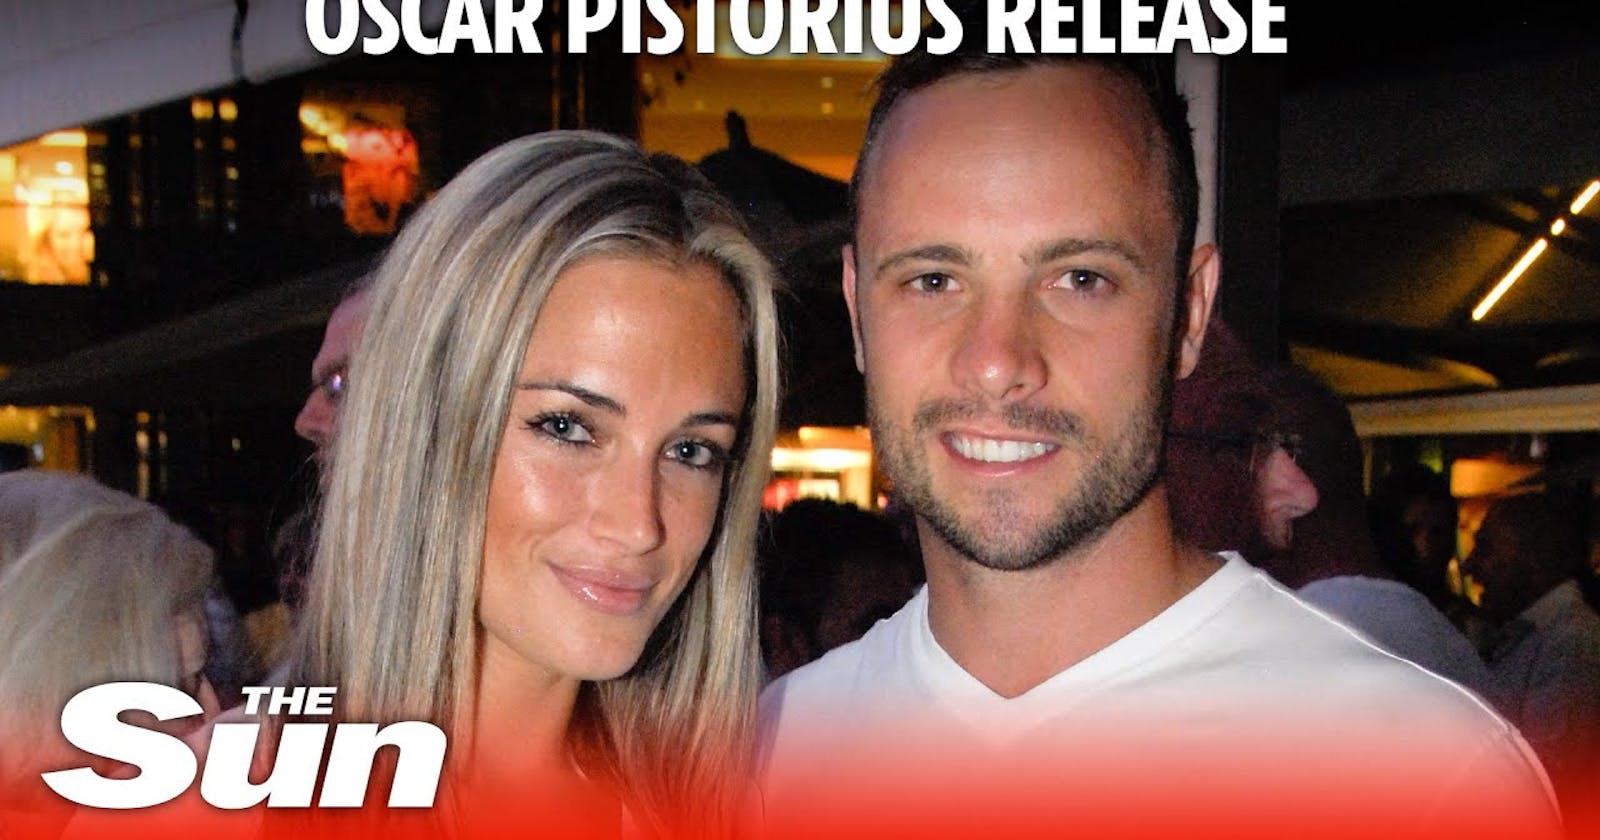 Oscar Pistorius released from South Africa prison after serving 9 years for girlfriend’s murder